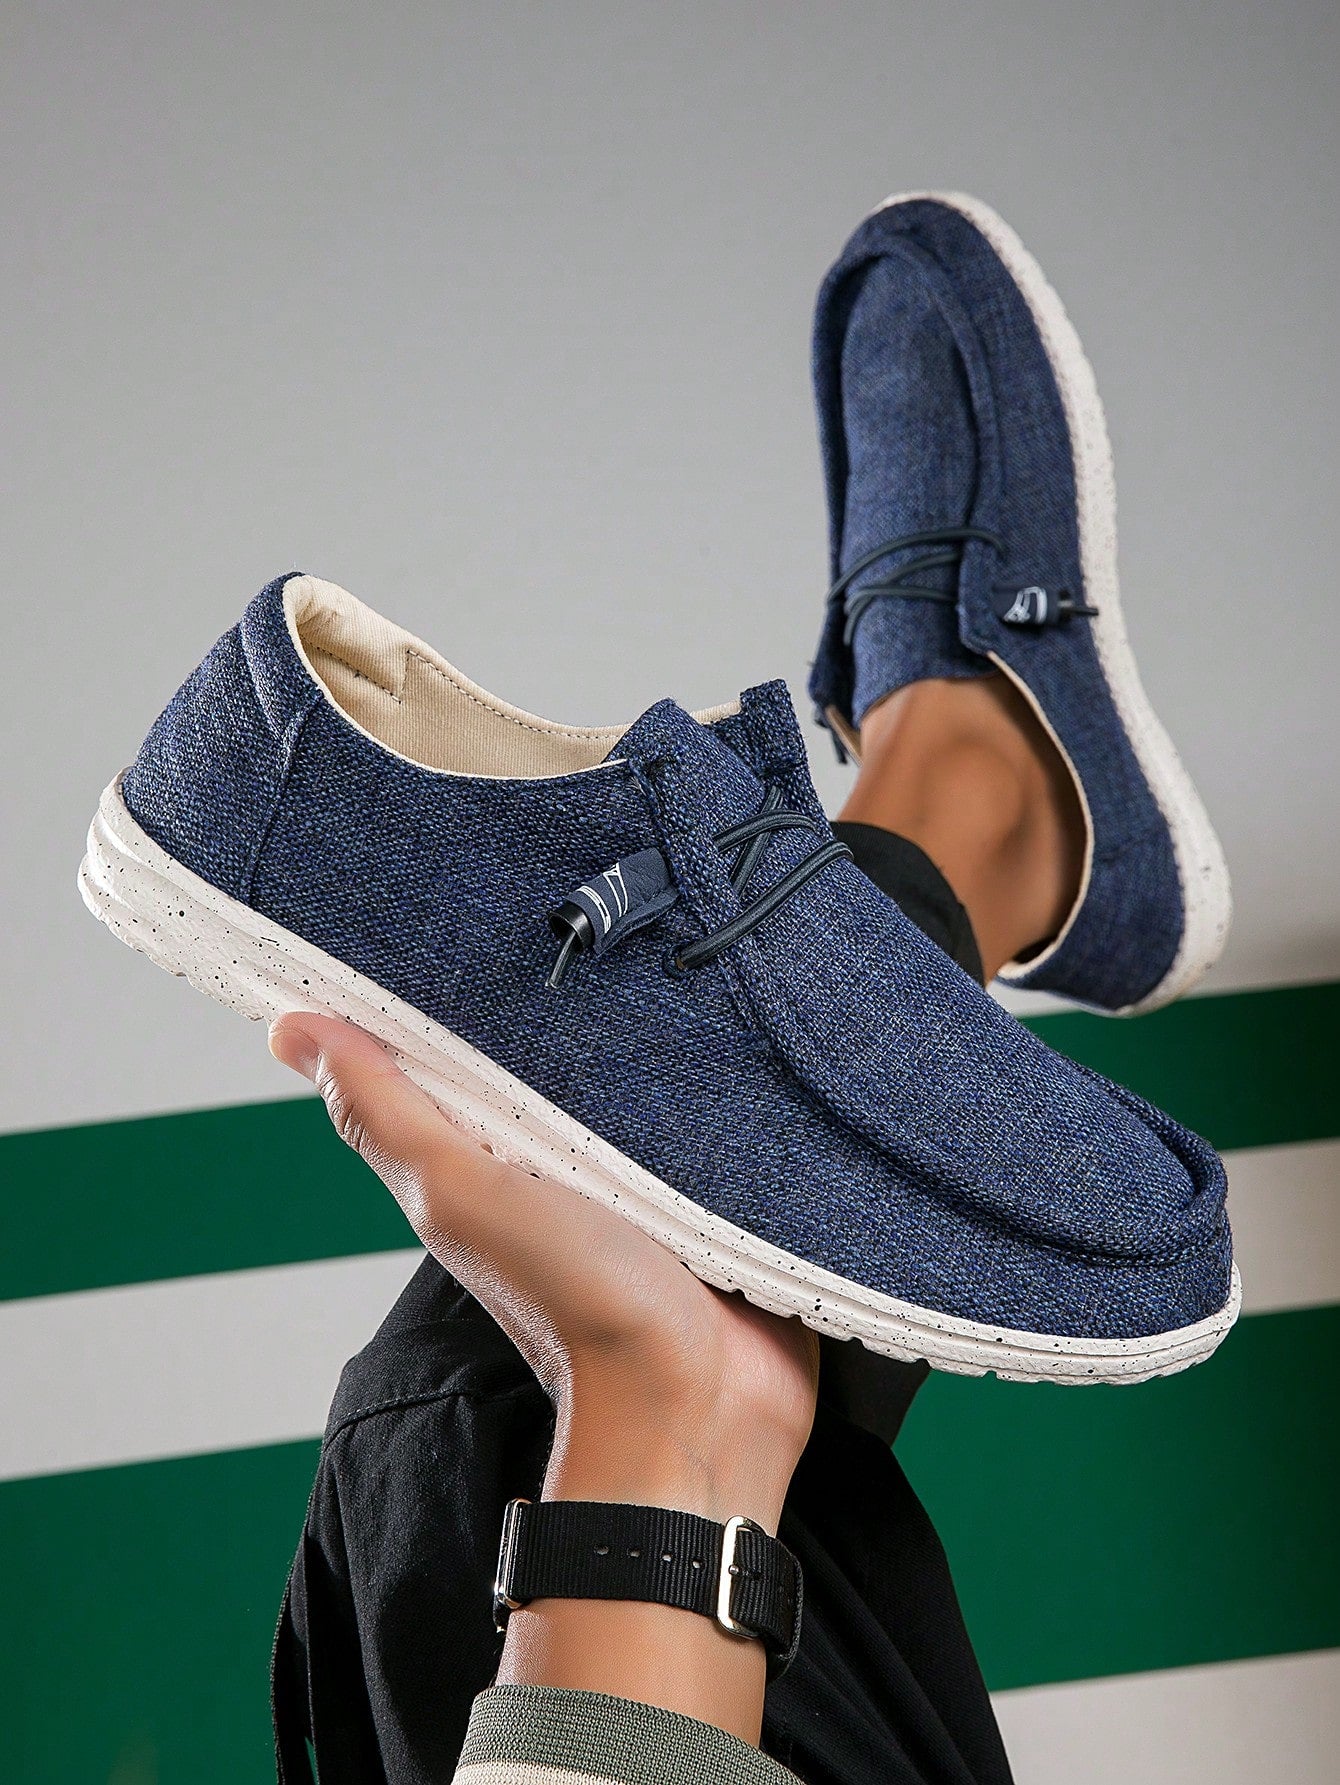 Fashion Blue Loafers For Men, Lace Up Design Boat Shoes